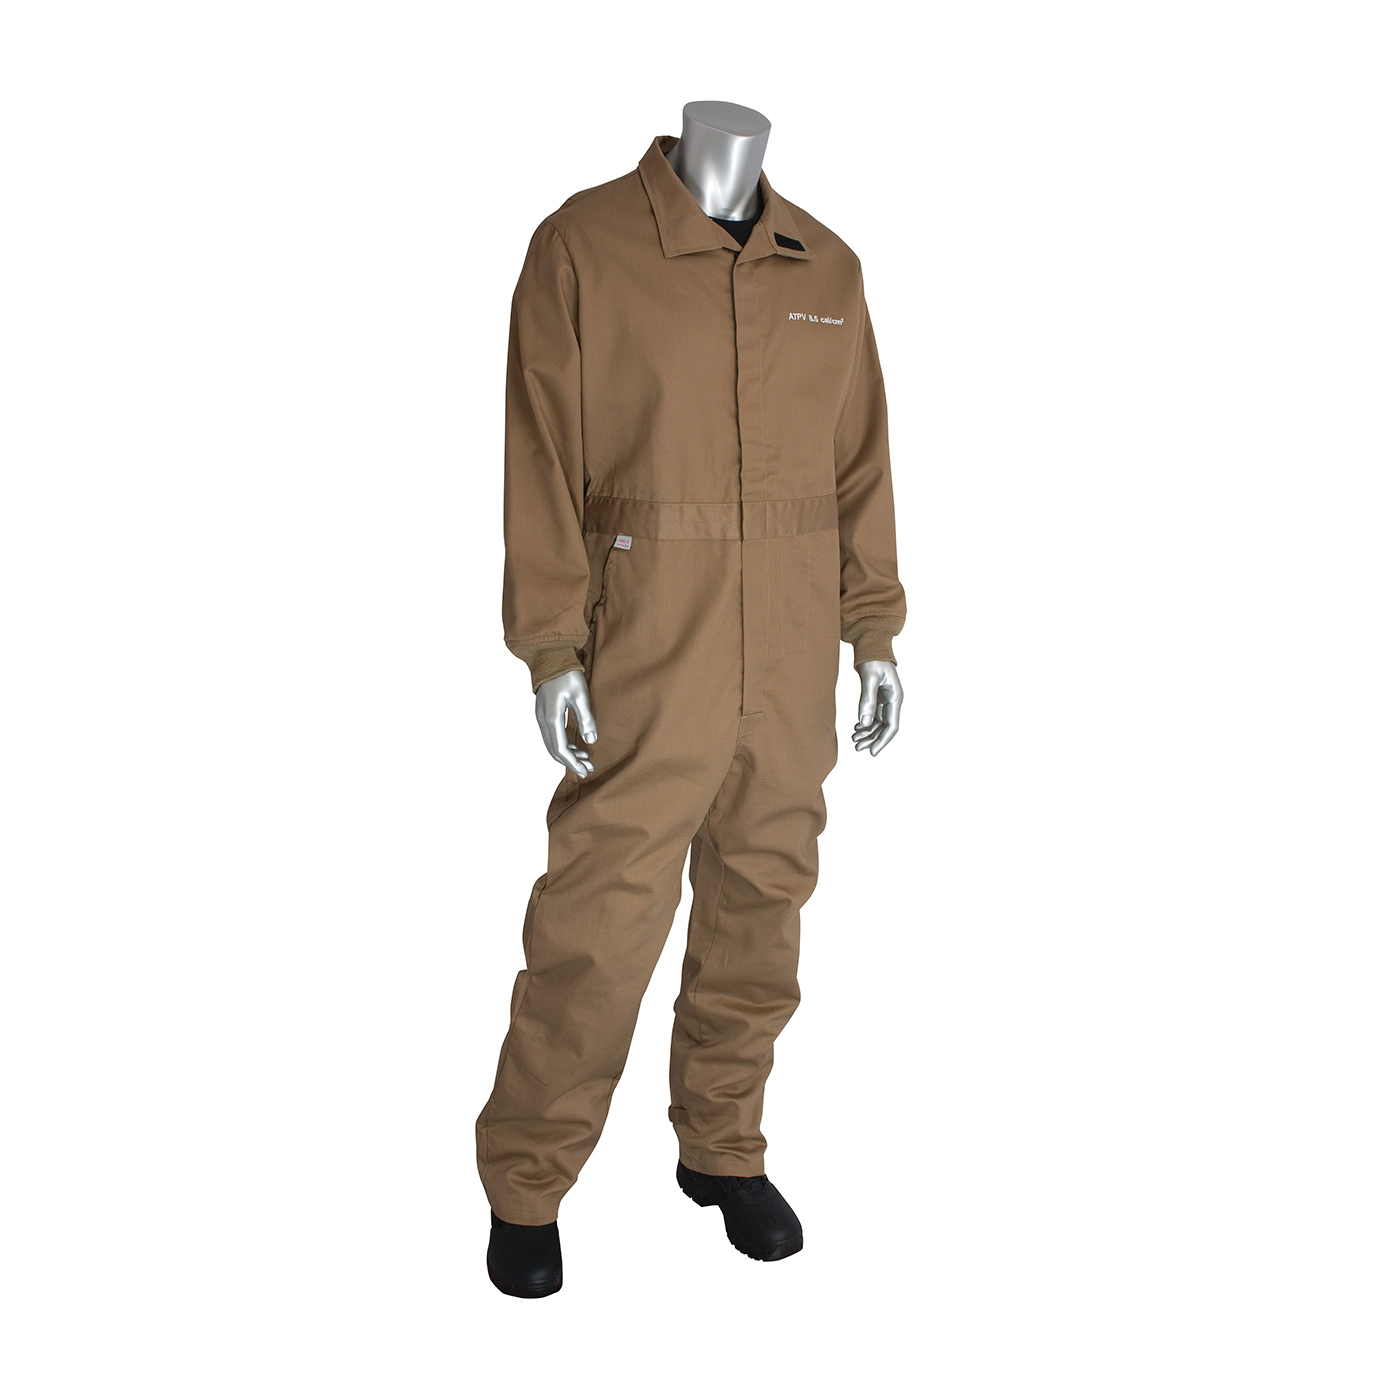 PIP® 9100-2100D/S Flame Resistant Coverall With Vented Back, S, Khaki, 90% Cotton/10% Nylon/FR Twill Weave, 36 to 38 in Chest, 32 in L Inseam